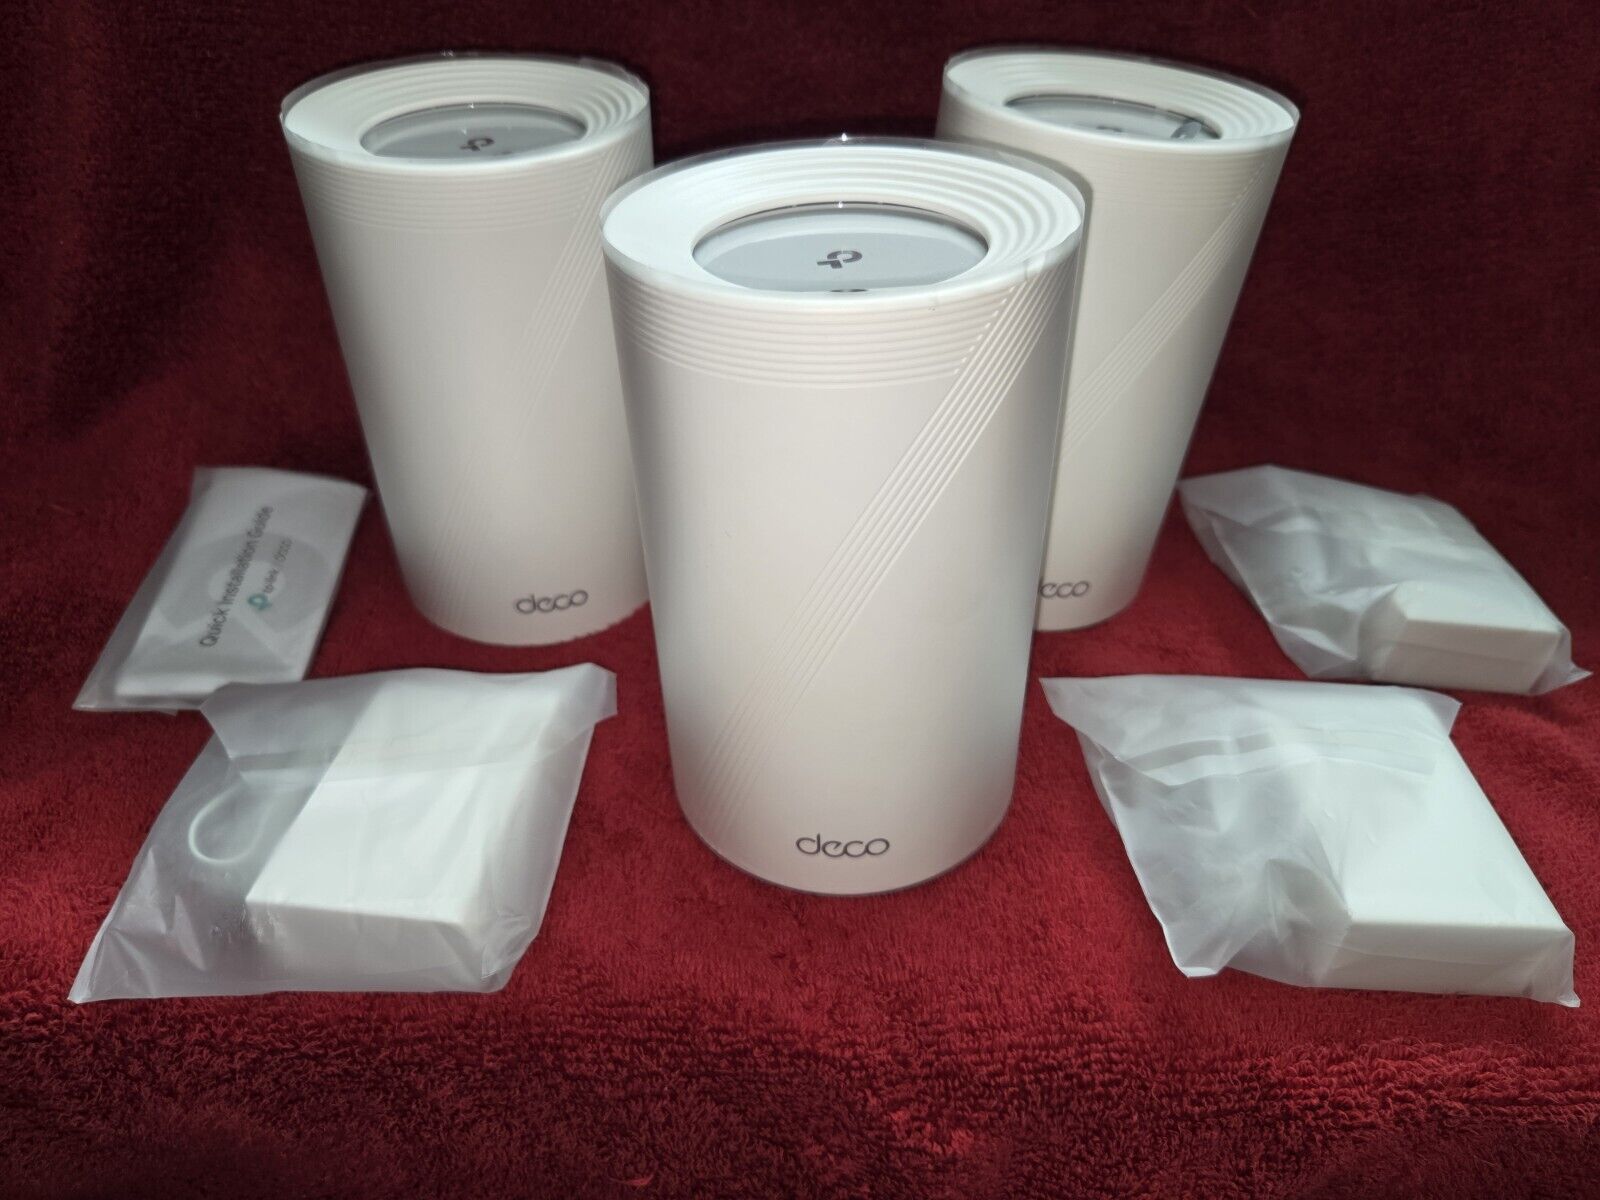 TP-Link - BE11000 Multi-Gig Whole Home Mesh Wi-Fi 7 System (3-Pack) - White